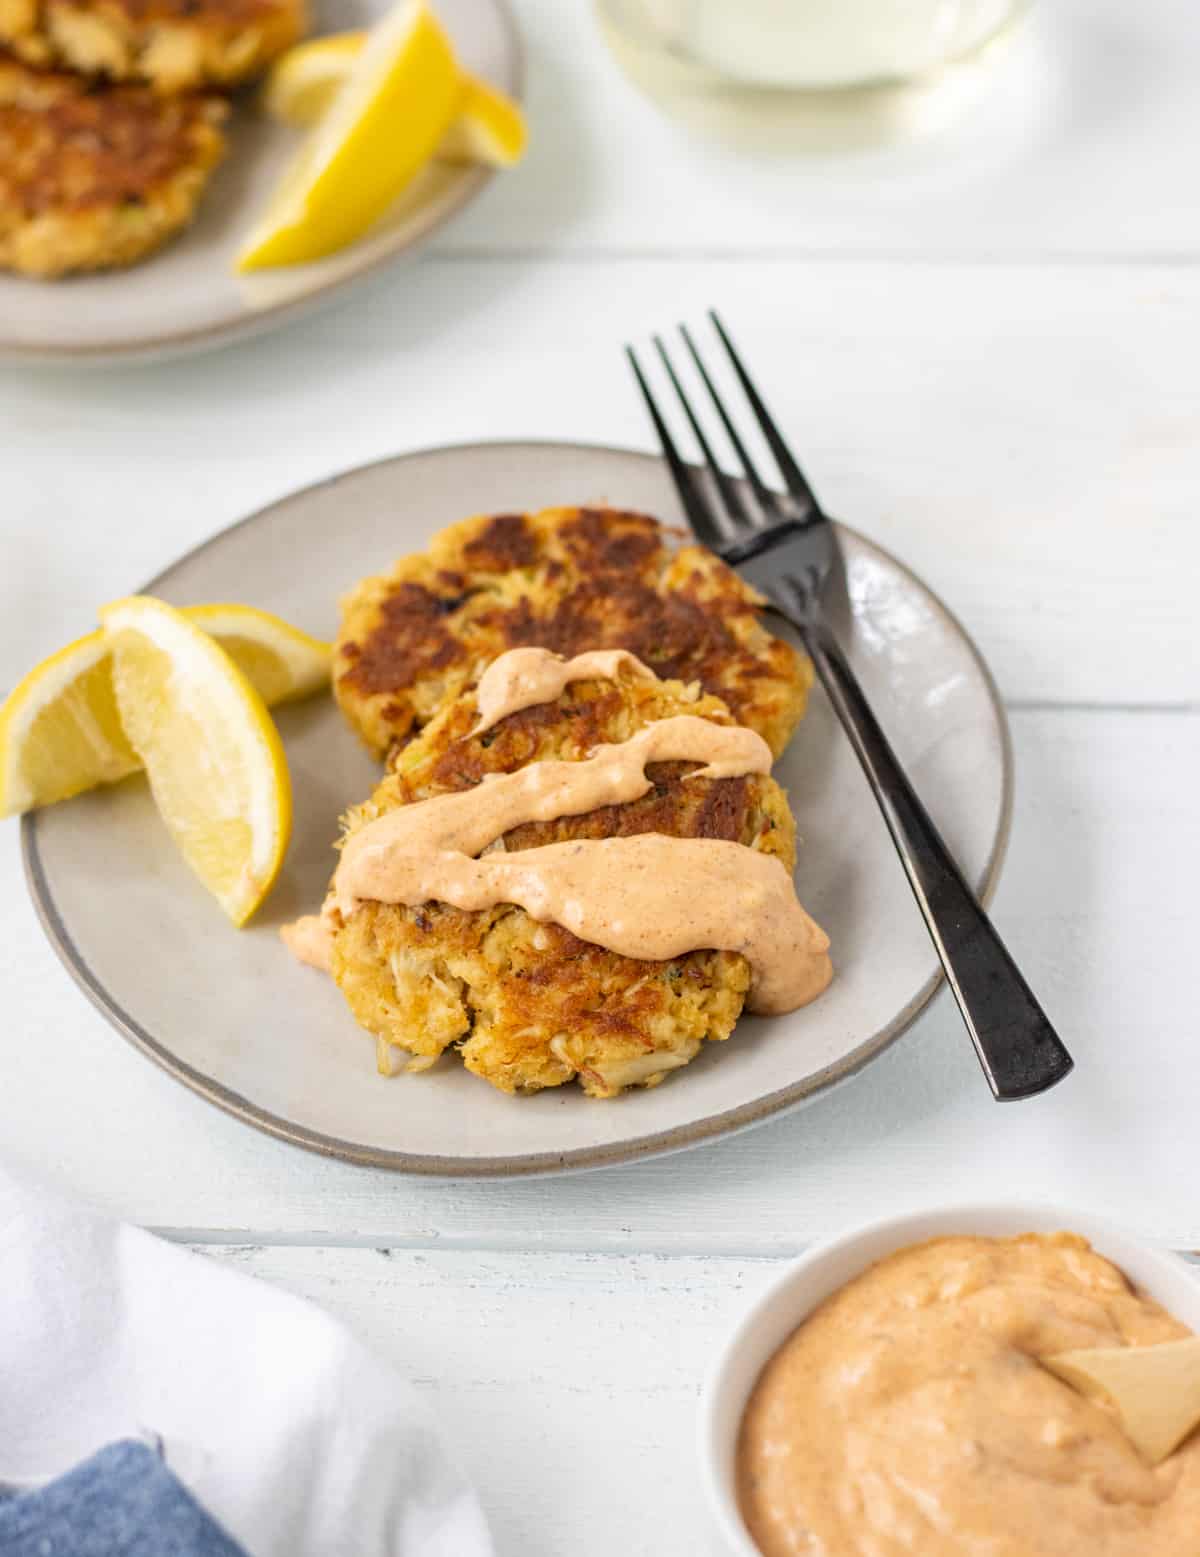 Two crab cakes topped with remoulade sauce on a plate with a fork and lemon wedges and another plate in the background.